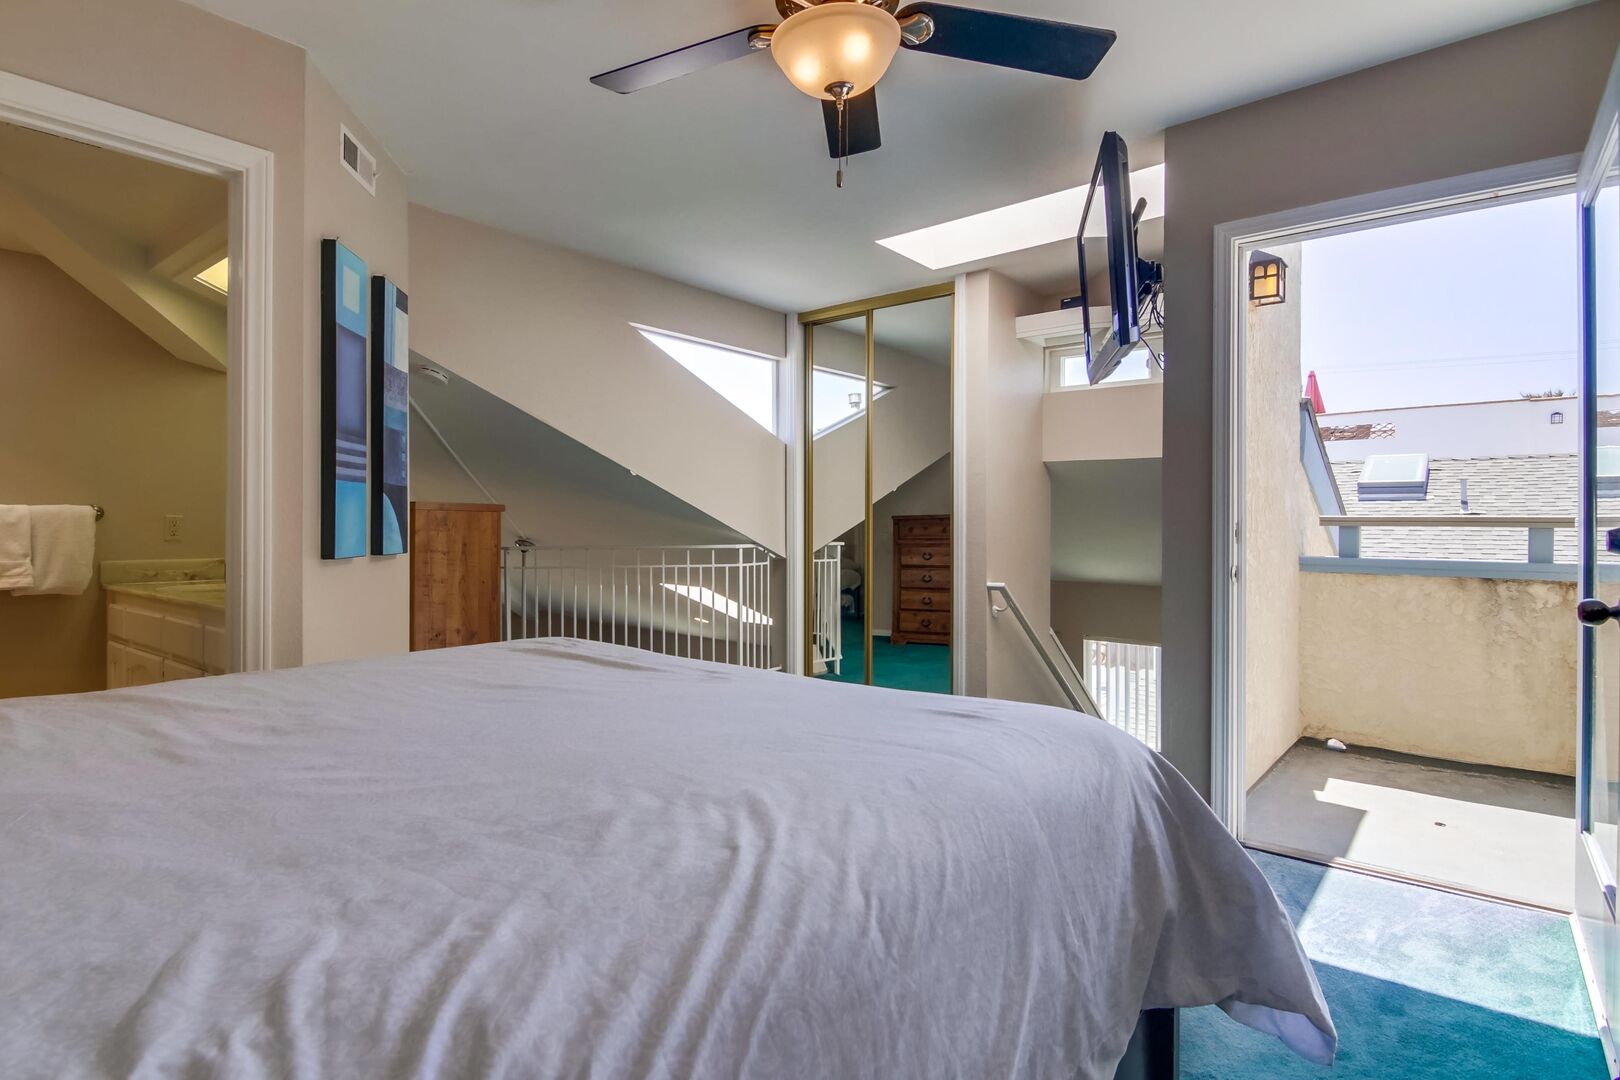 Upstairs loft with small balcony, queen size bed, bathroom, TV, ceiling fan